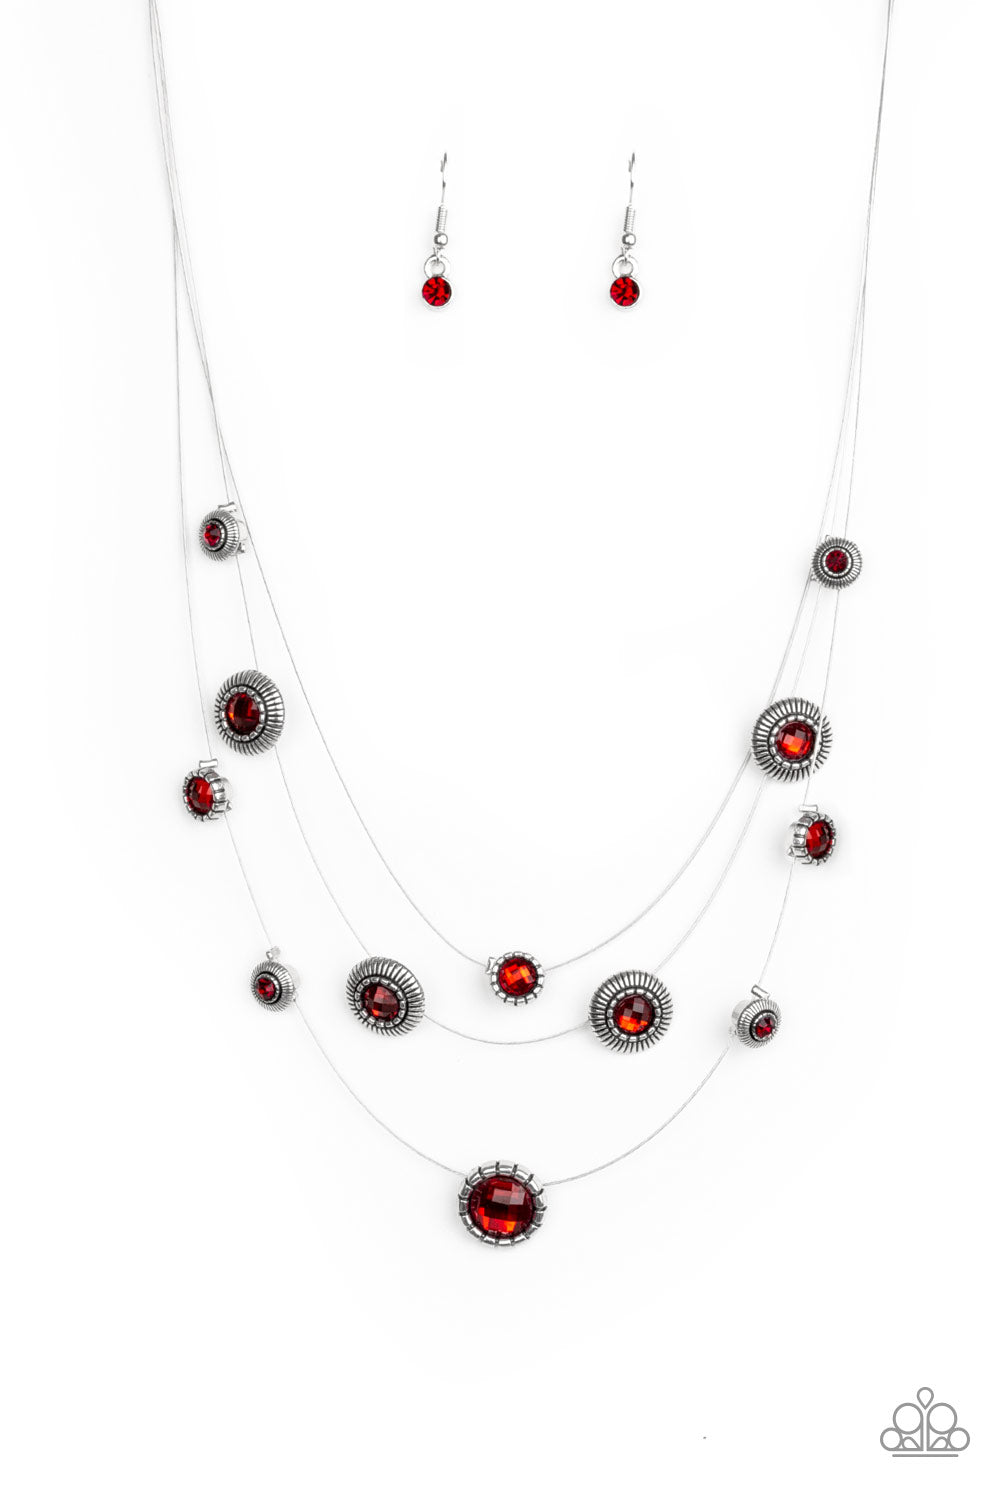 SHEER THING! - RED RUBY RHINESTONES WIRE NECKLACE